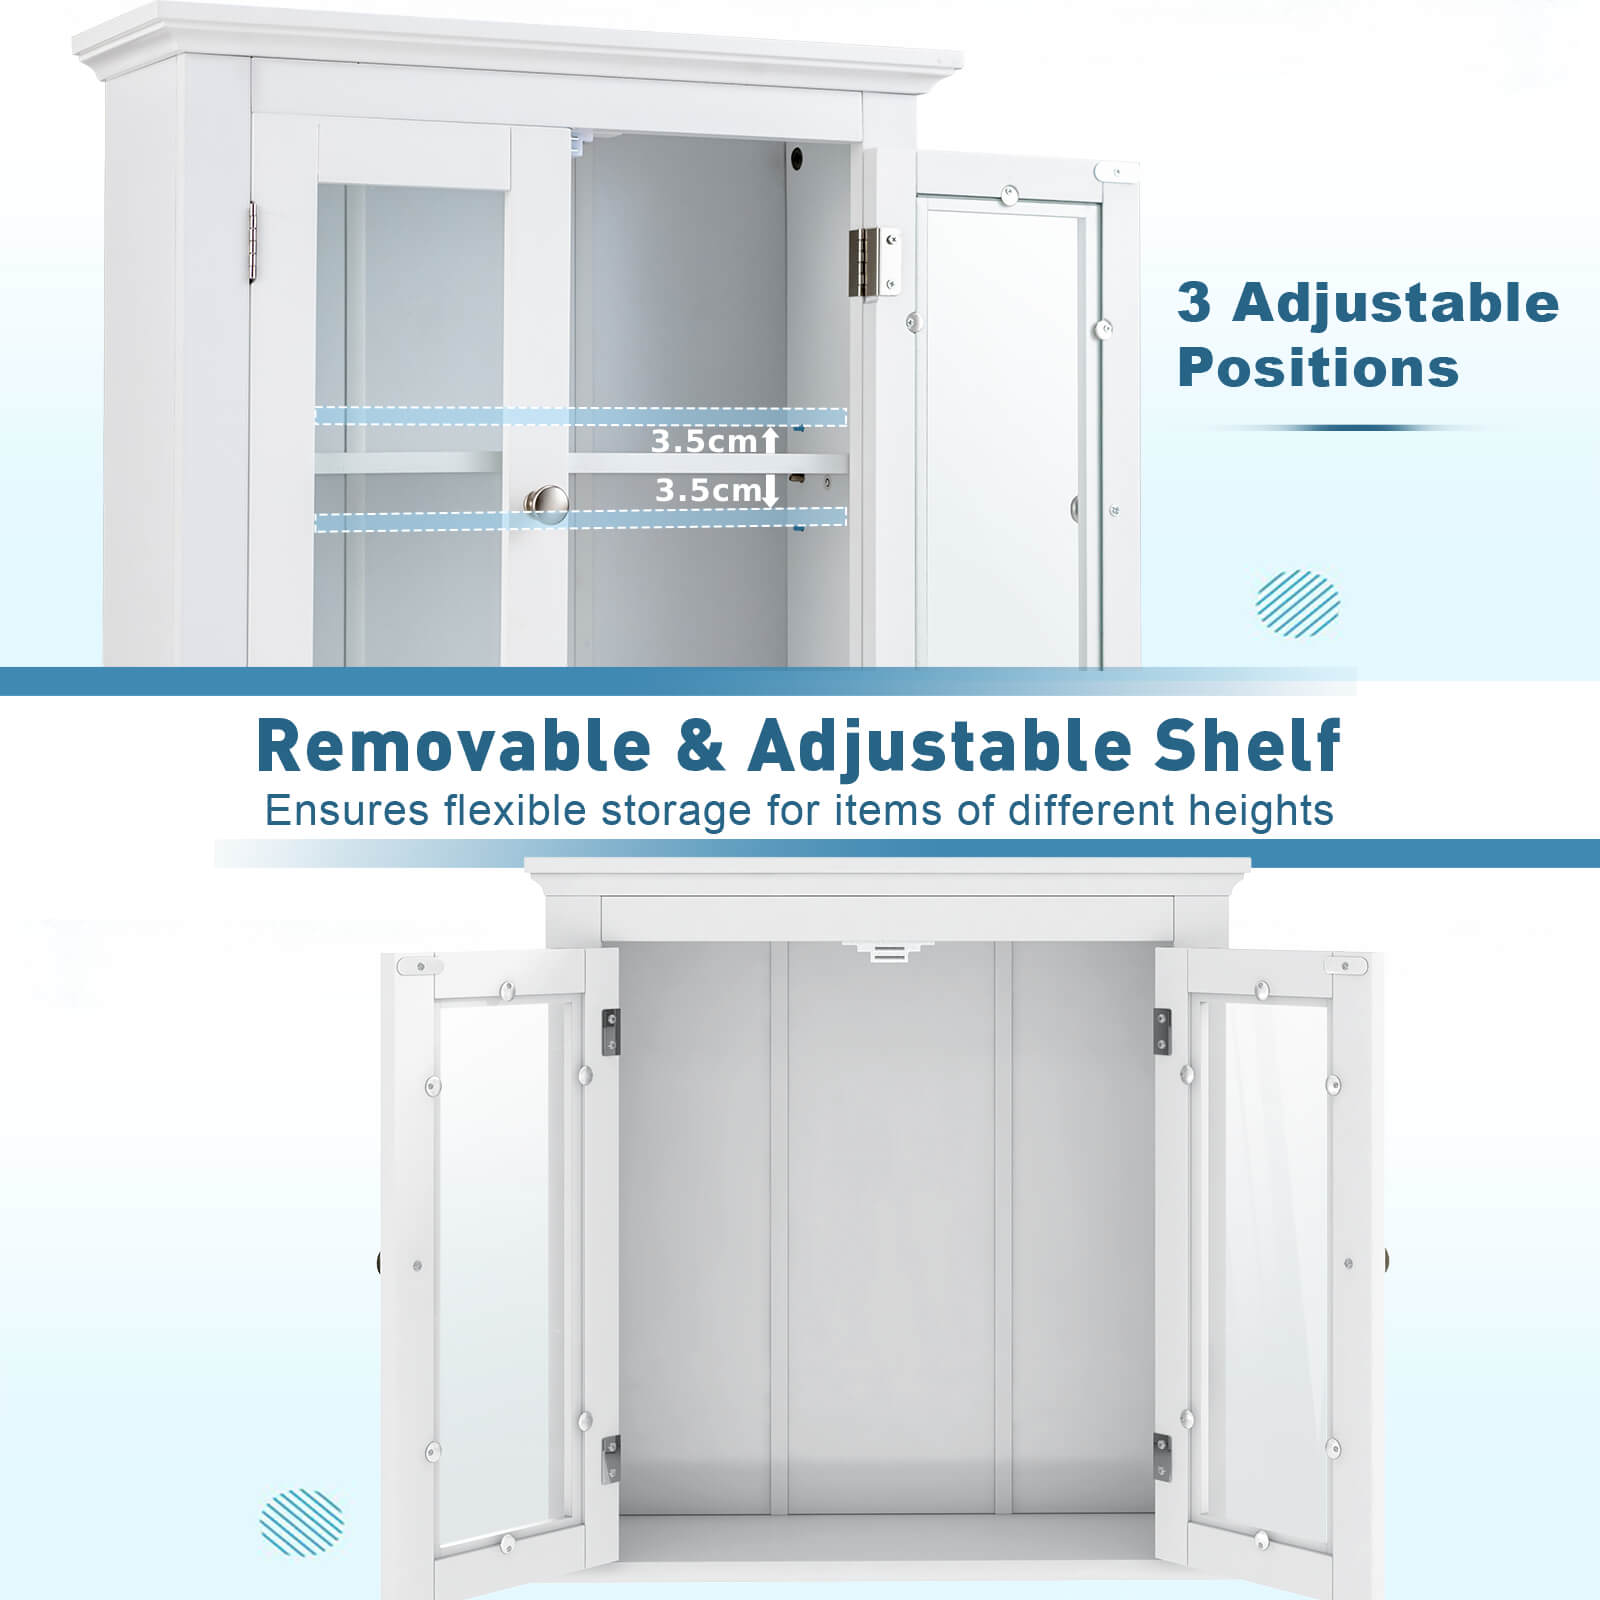 Wall_Mounted_Door_Cabinet_with_3Level_Adjustable_Shelf_and_Double_Tempered_Glass_Doors_WH-5.jpg